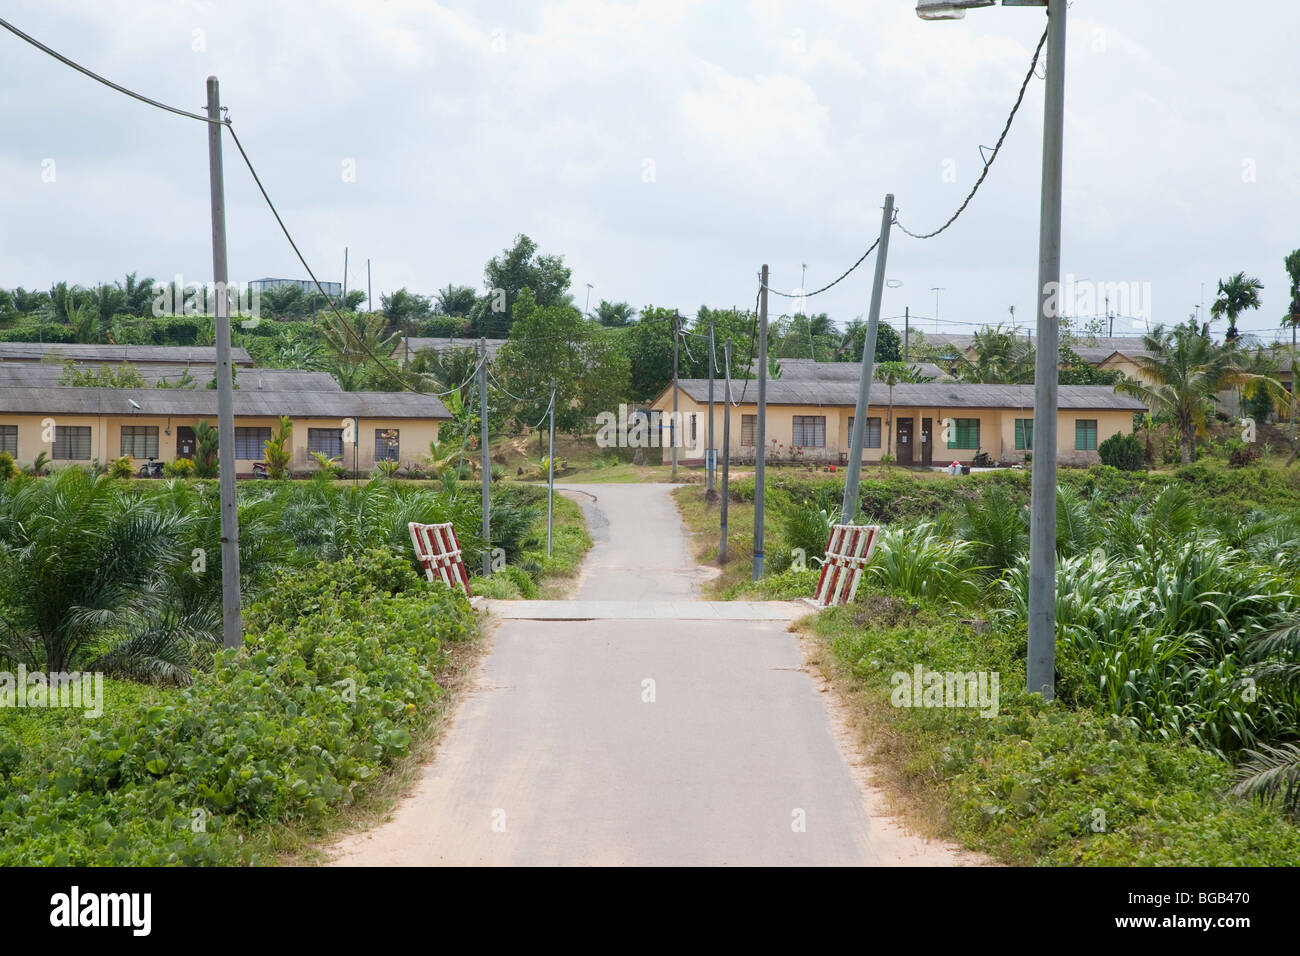 About one half of the people who work on the Sindora Palm Oil Plantation also live there in provided housing (pictured). Stock Photo